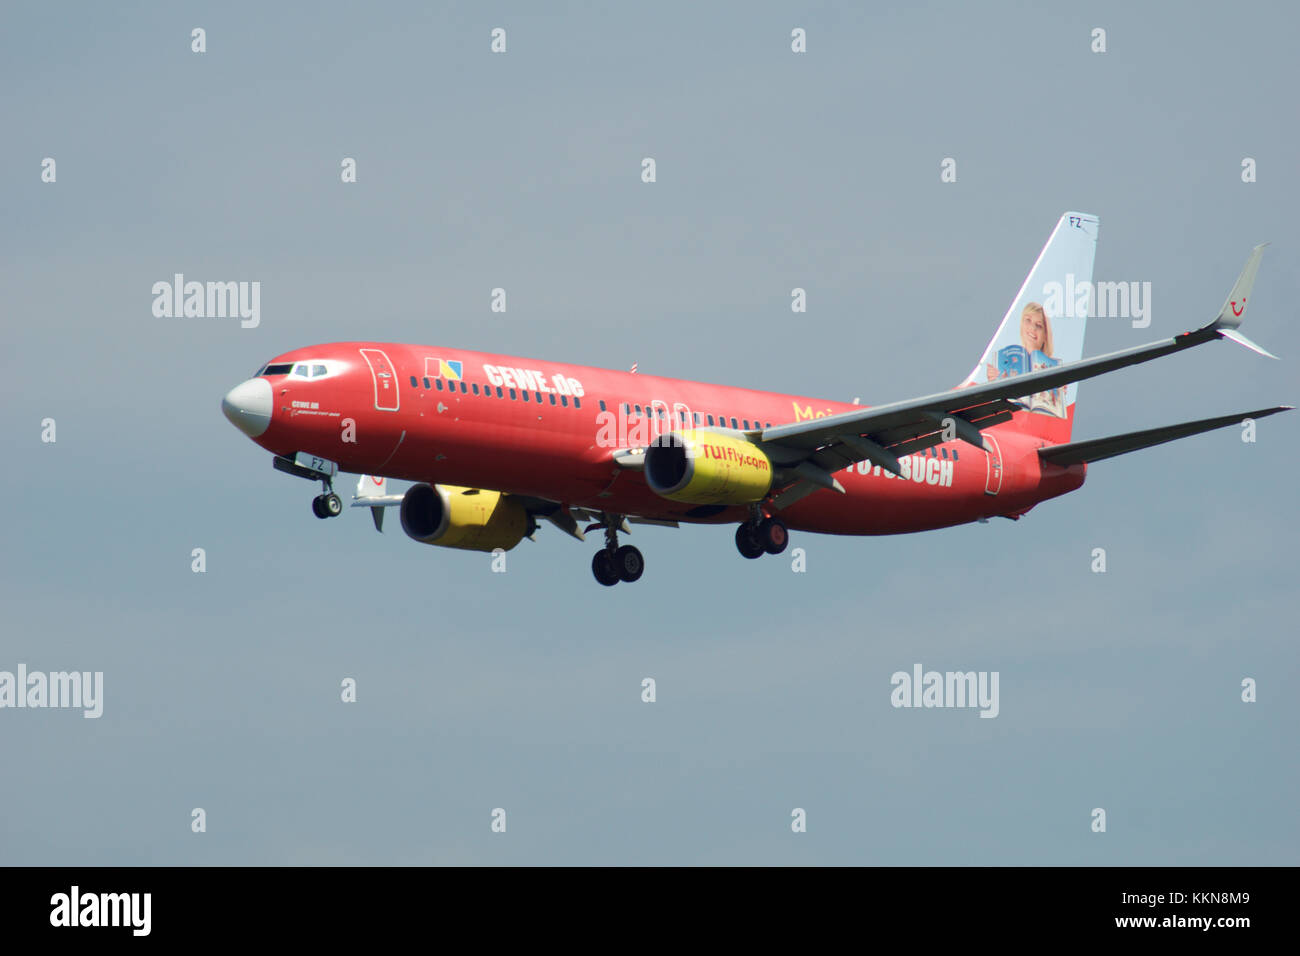 FRANKFURT, GERMANY - JUL 09th, 2017: TUIfly AIRLINES Boeing 737-800 with red advertisement lands at Frankfurt airport, Boeing 737 Next Gen, MSN 30883, Registration D-AHFZ, TUIfly-a German leisure airline owned by the travel and tourism company TUI Group Stock Photo